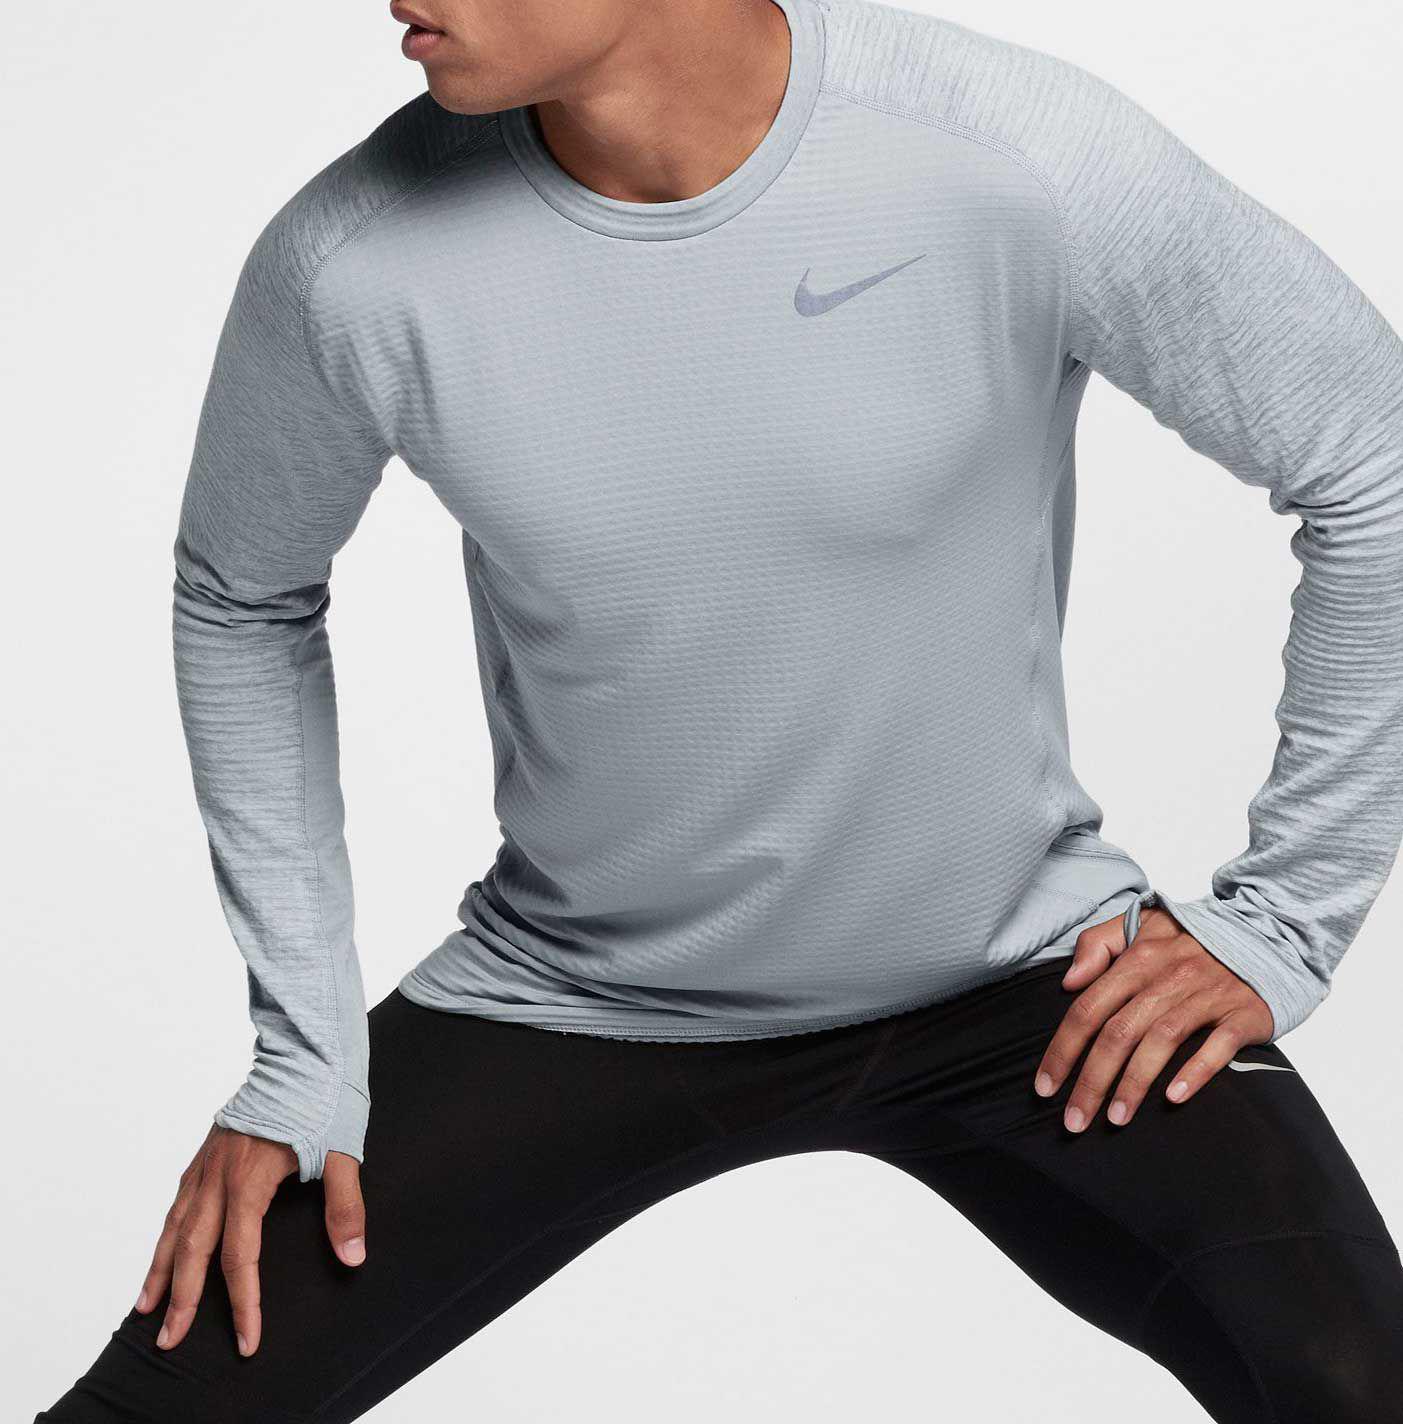 Nike Synthetic Therma Sphere Element Long Sleeve Crew Running Shirt in